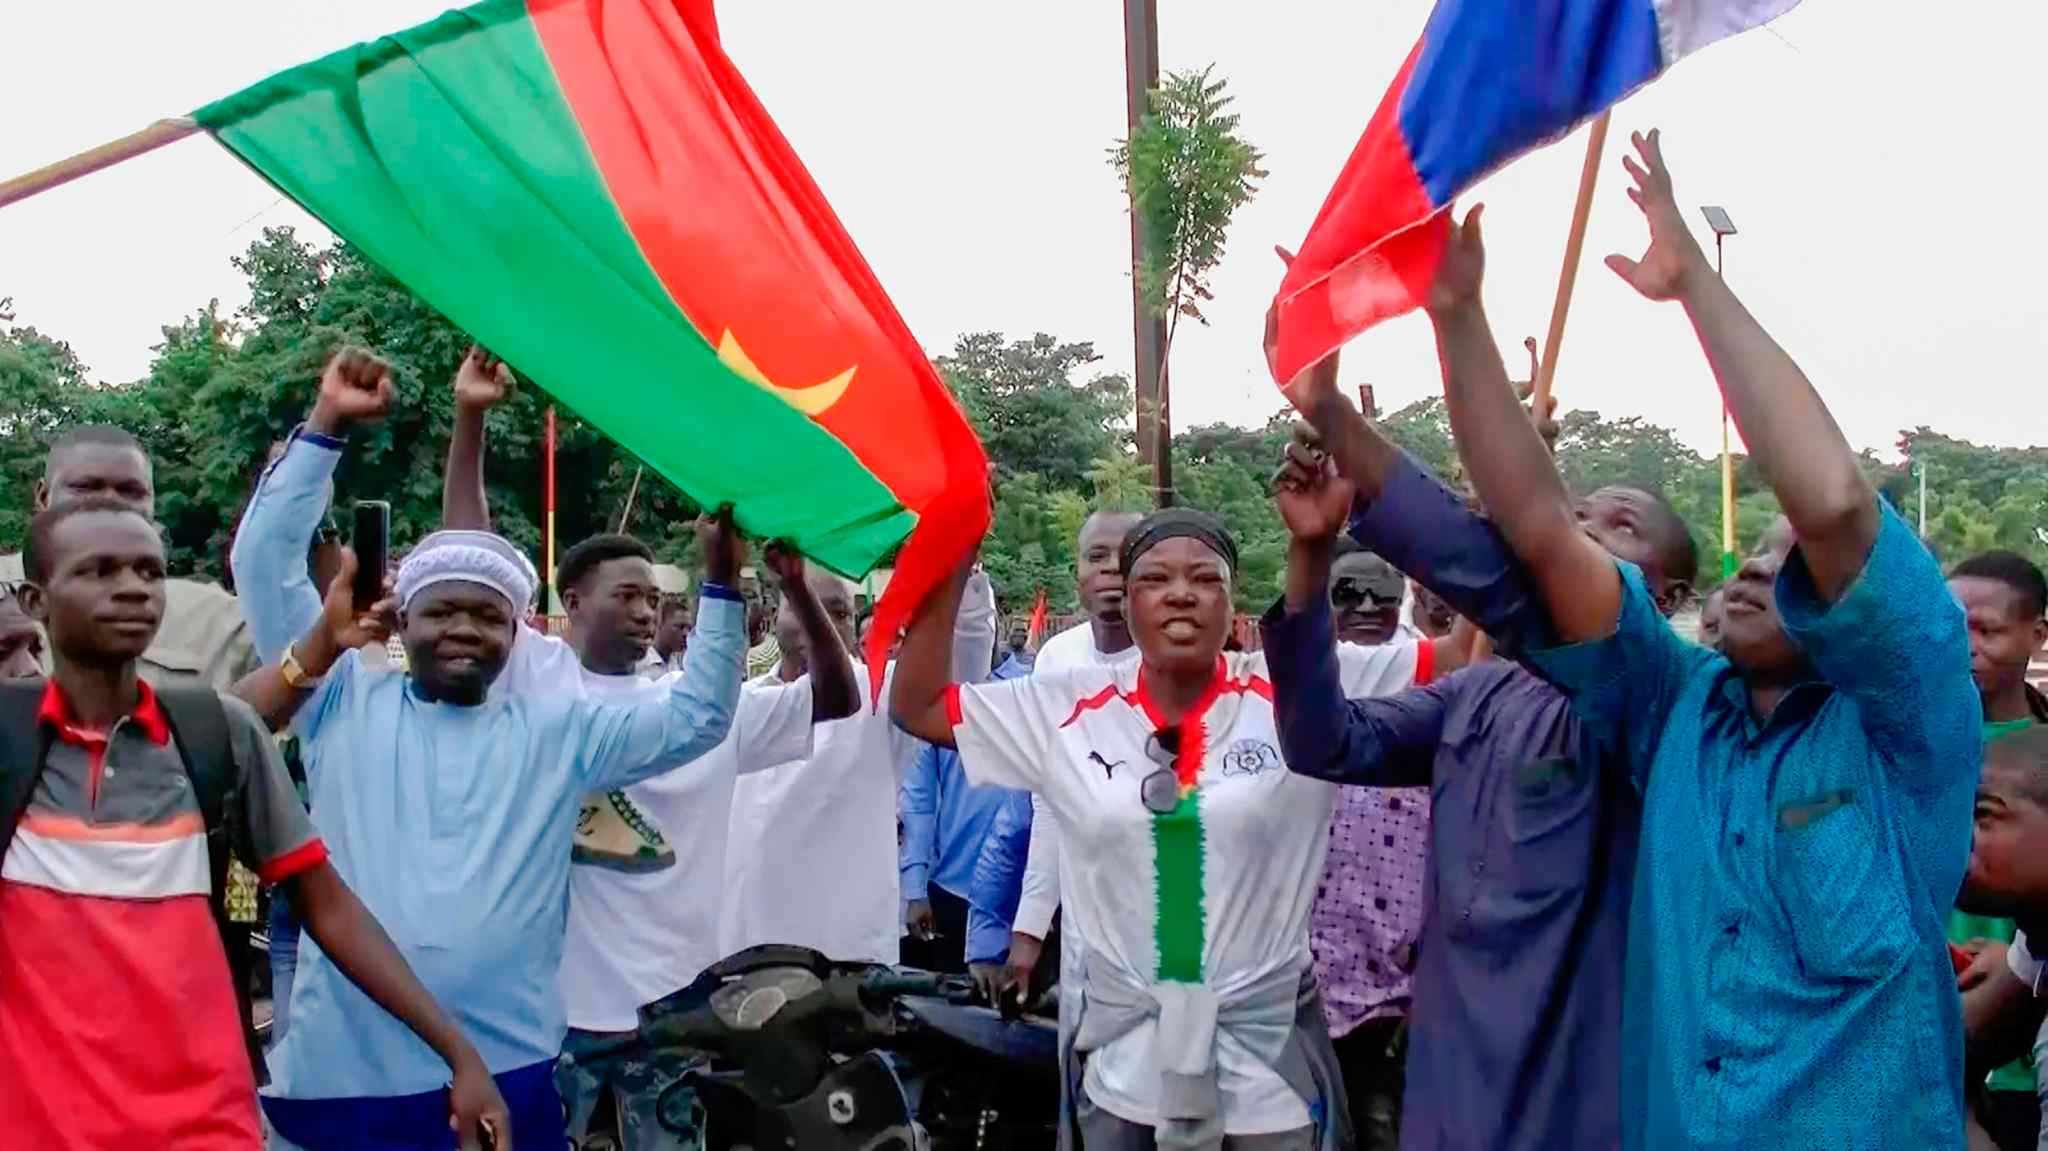 Burkina Faso hit by second coup in eight months